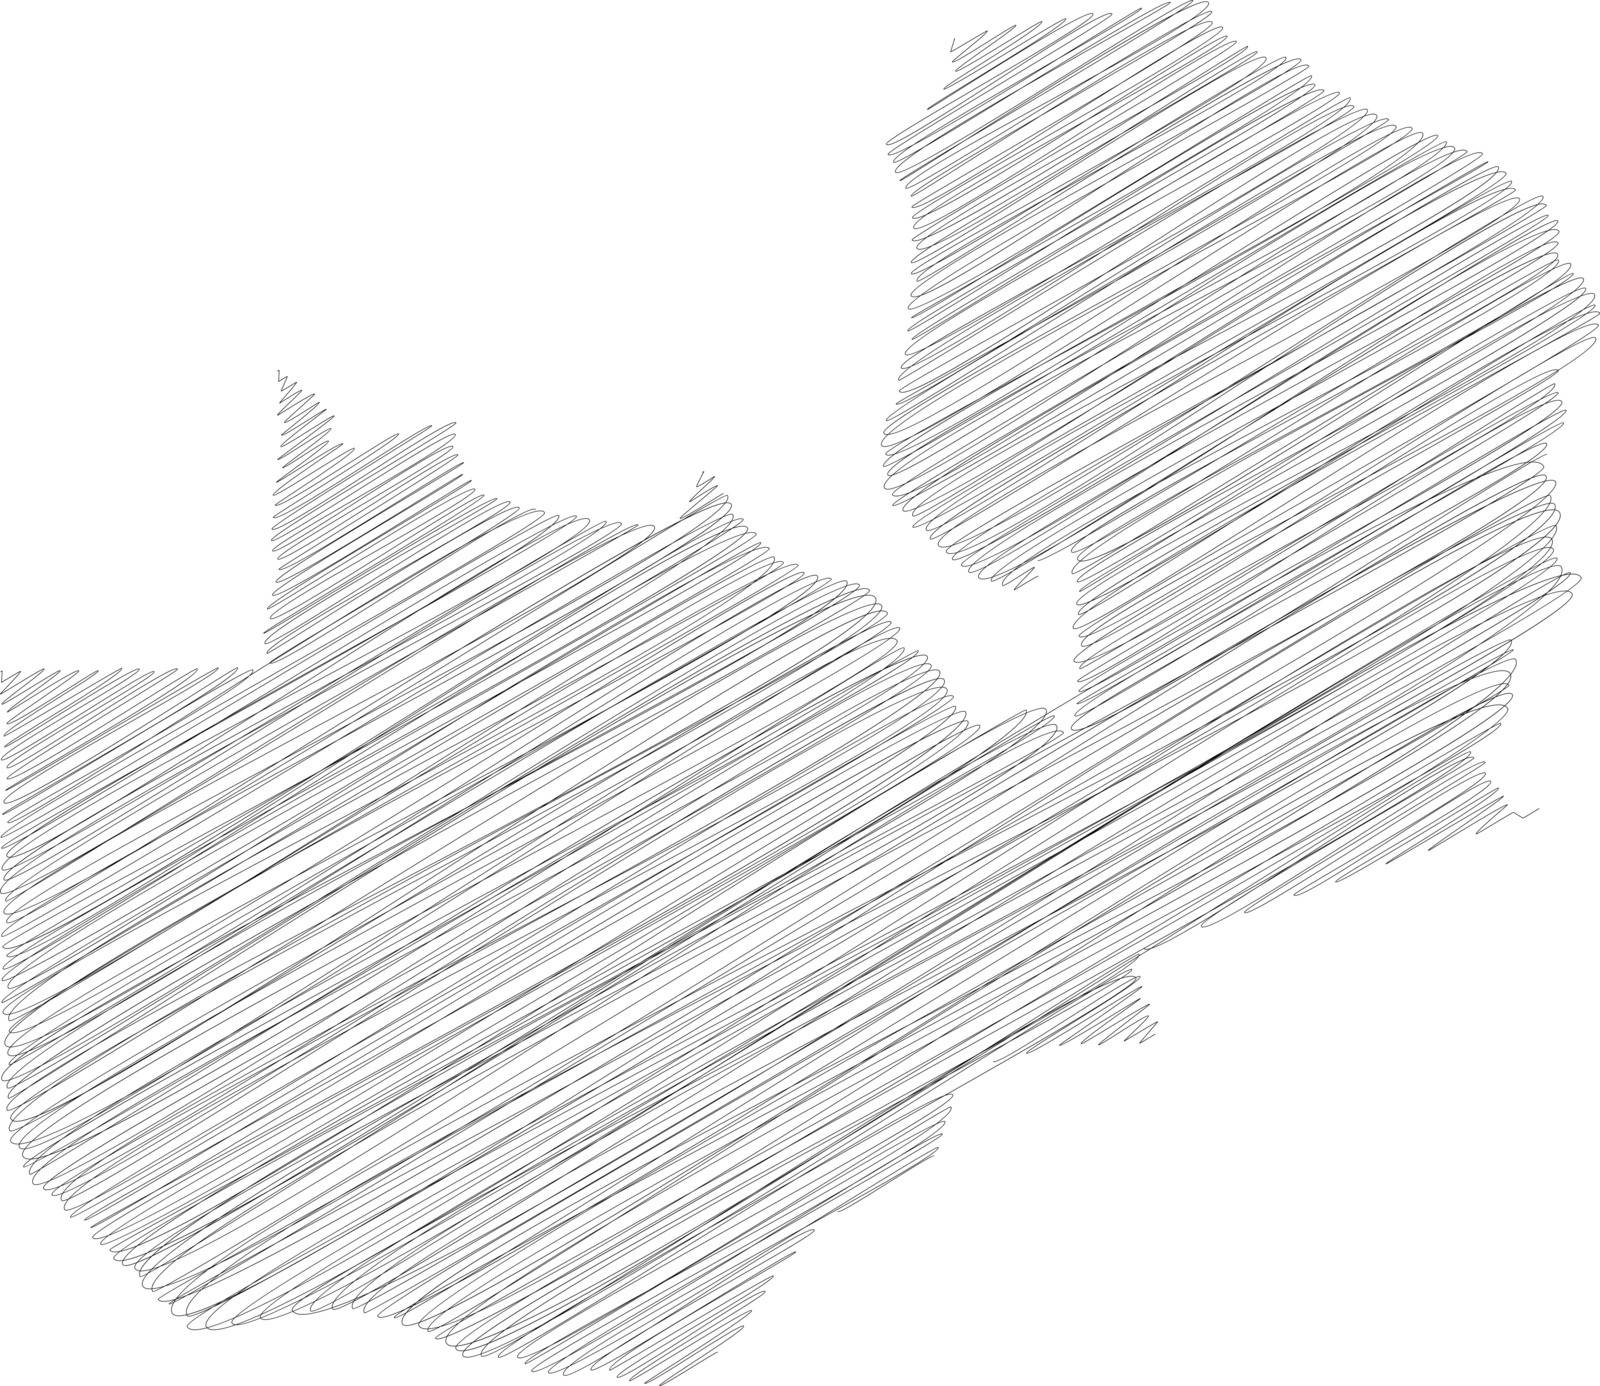 Zambia - pencil scribble sketch silhouette map of country area with dropped shadow. Simple flat vector illustration.